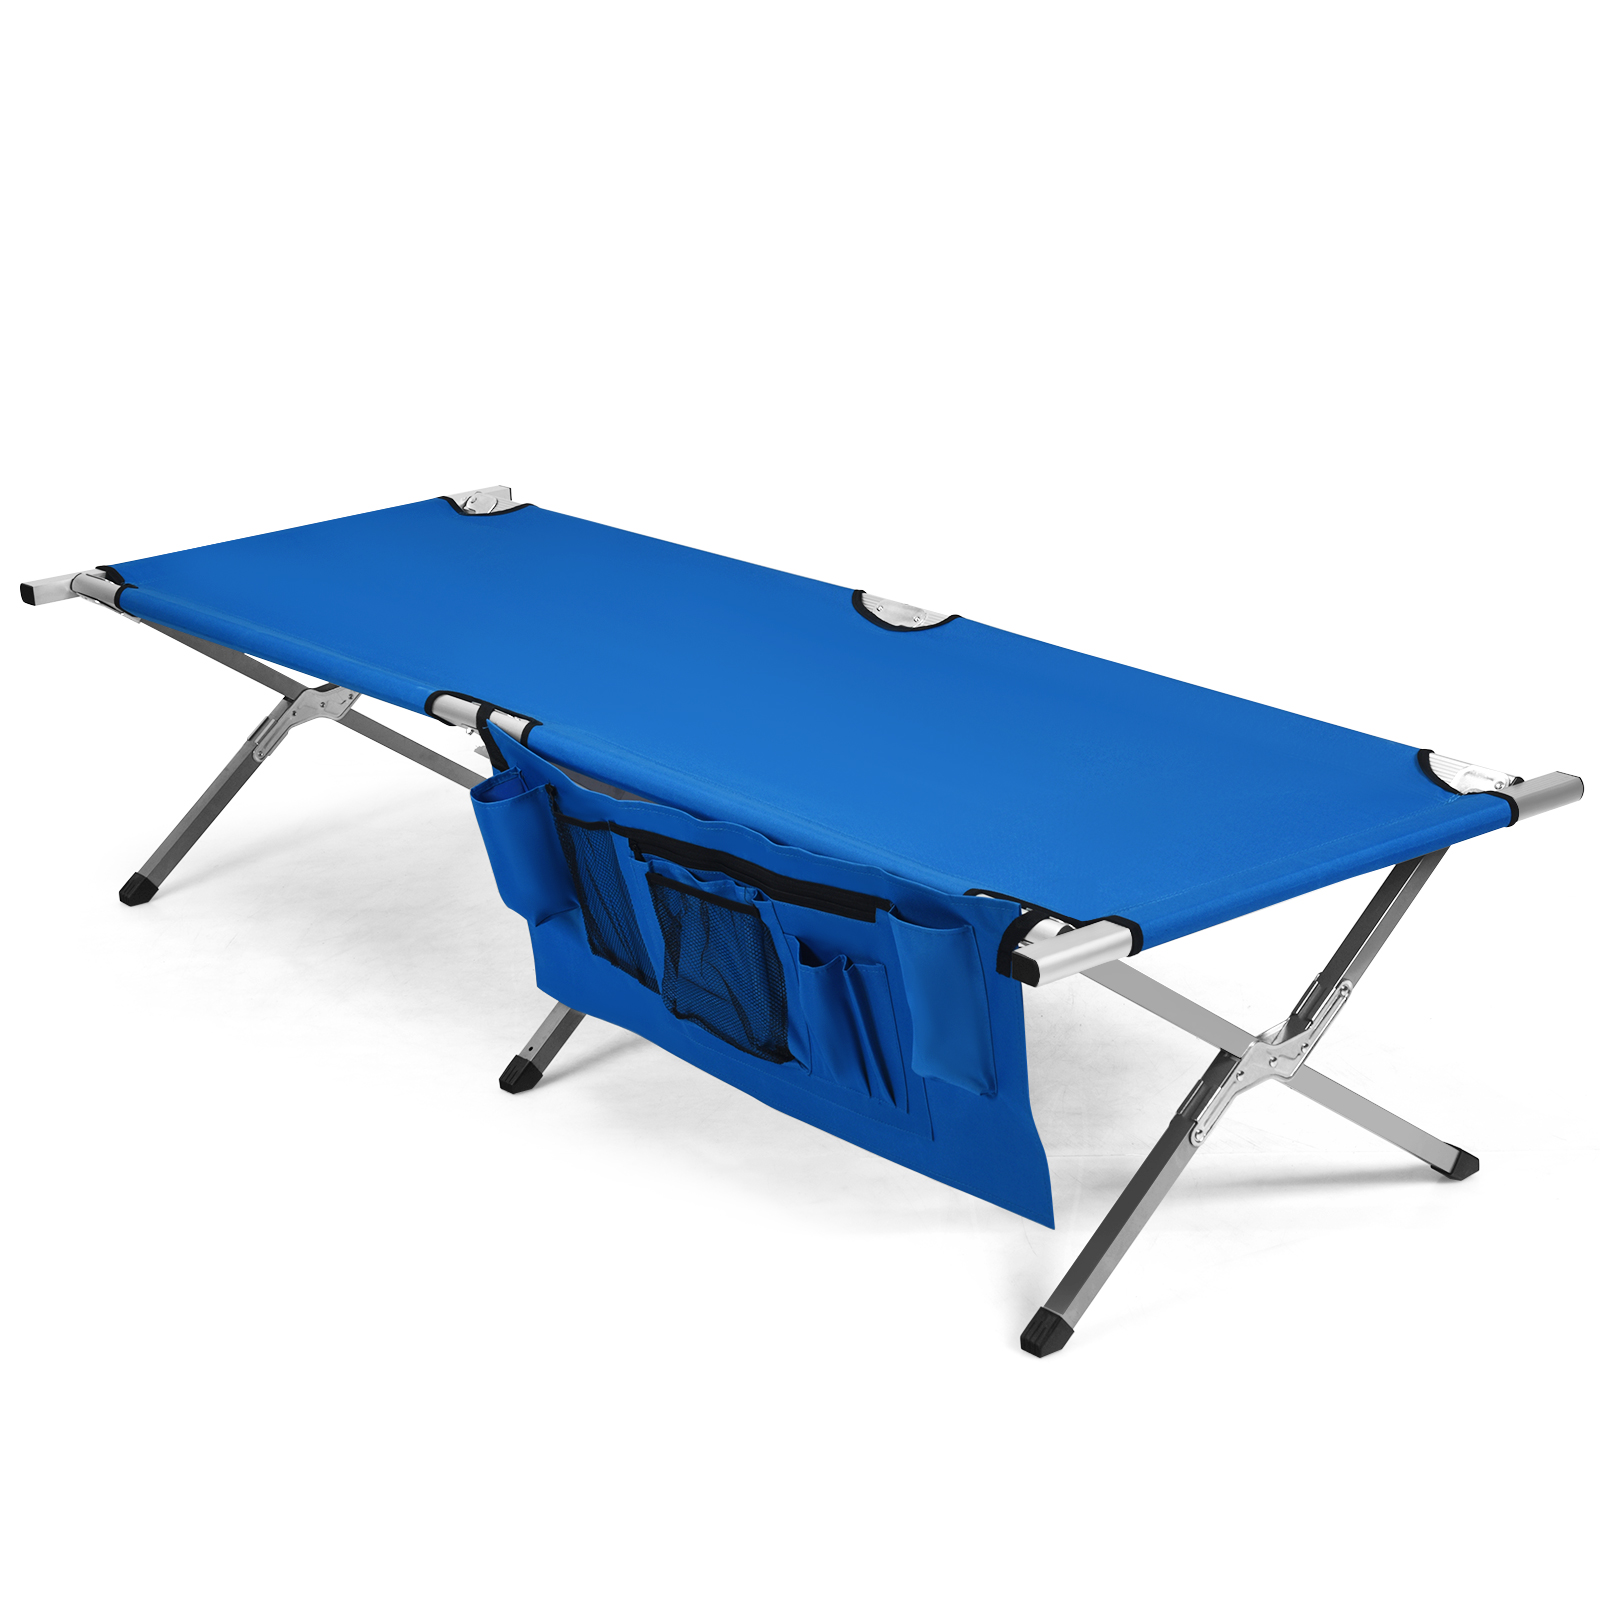 Folding_Camping_Bed_Outdoor_Sleeping_Cot_with_Carry_Bag_for_Beach_Blue-8.jpg